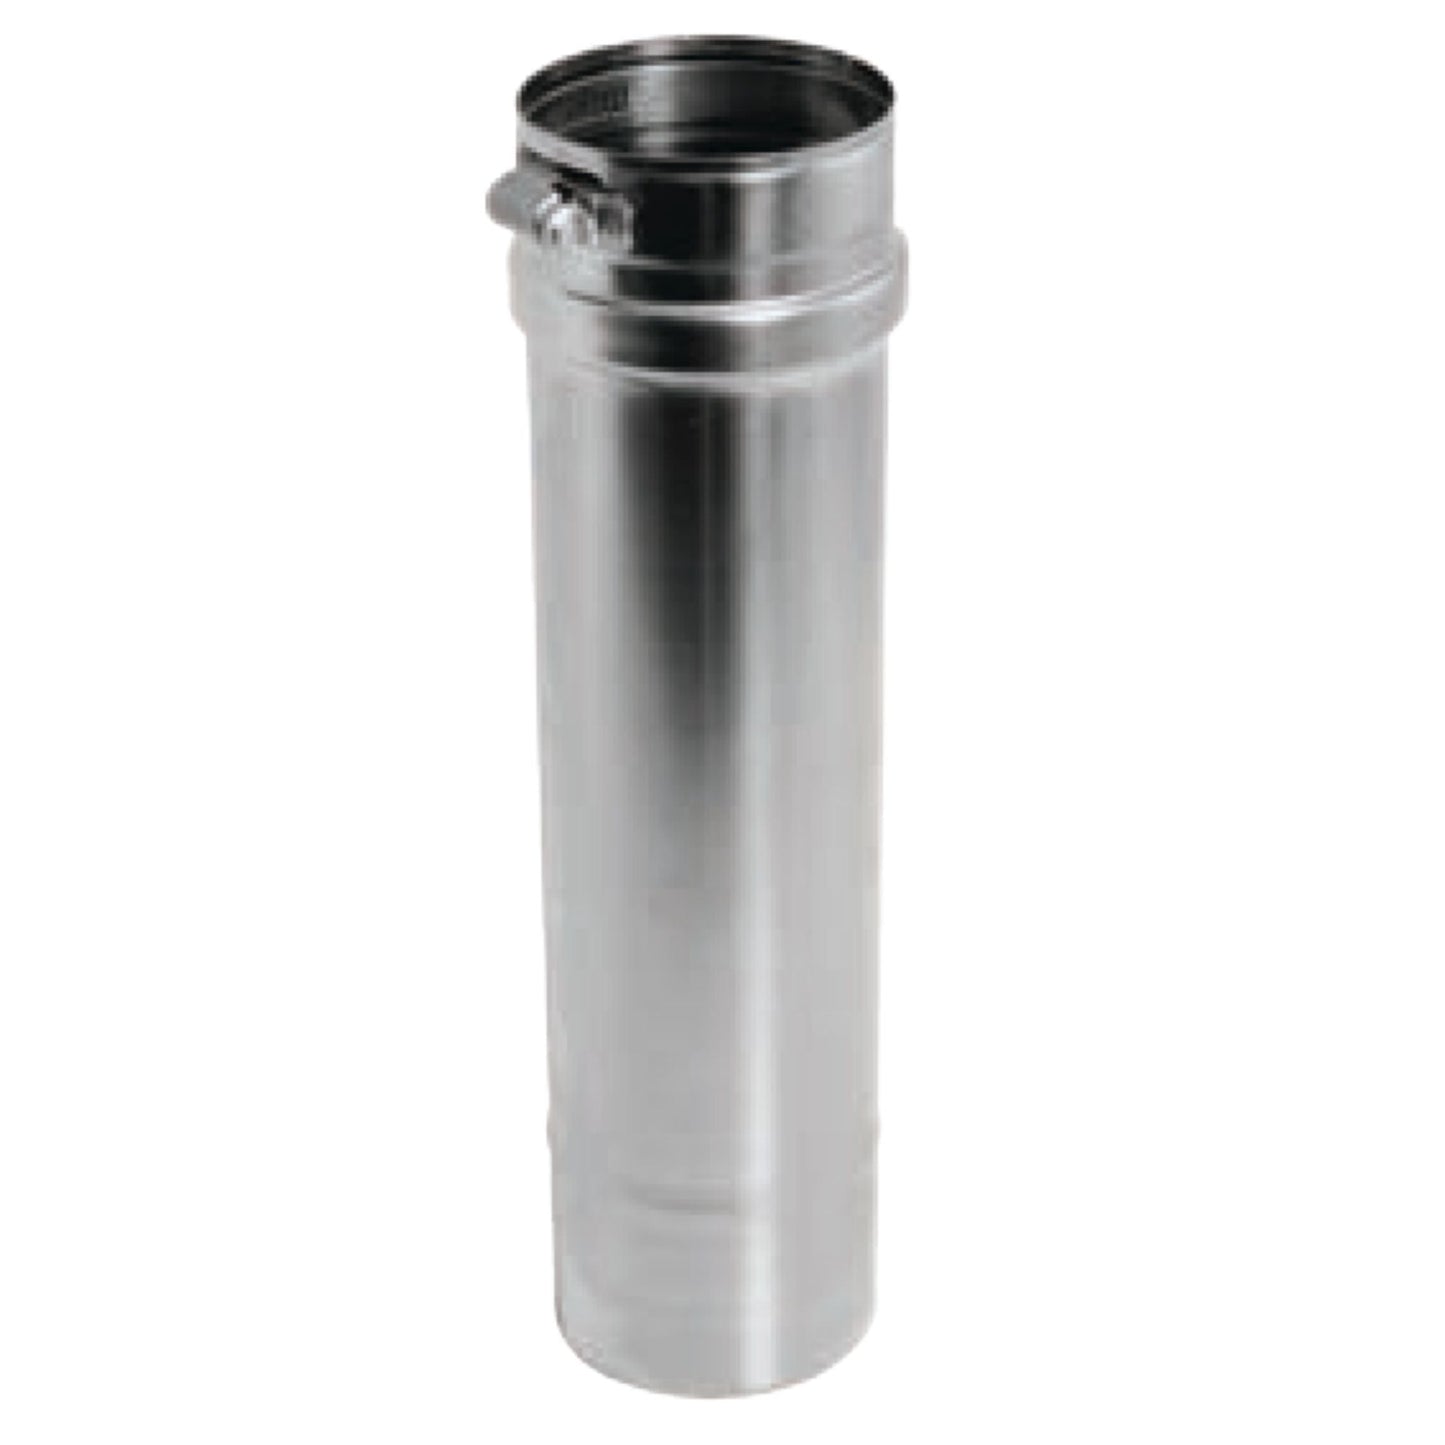 DuraVent FasNSeal 4" x 12" 316L Stainless Steel Vent Length